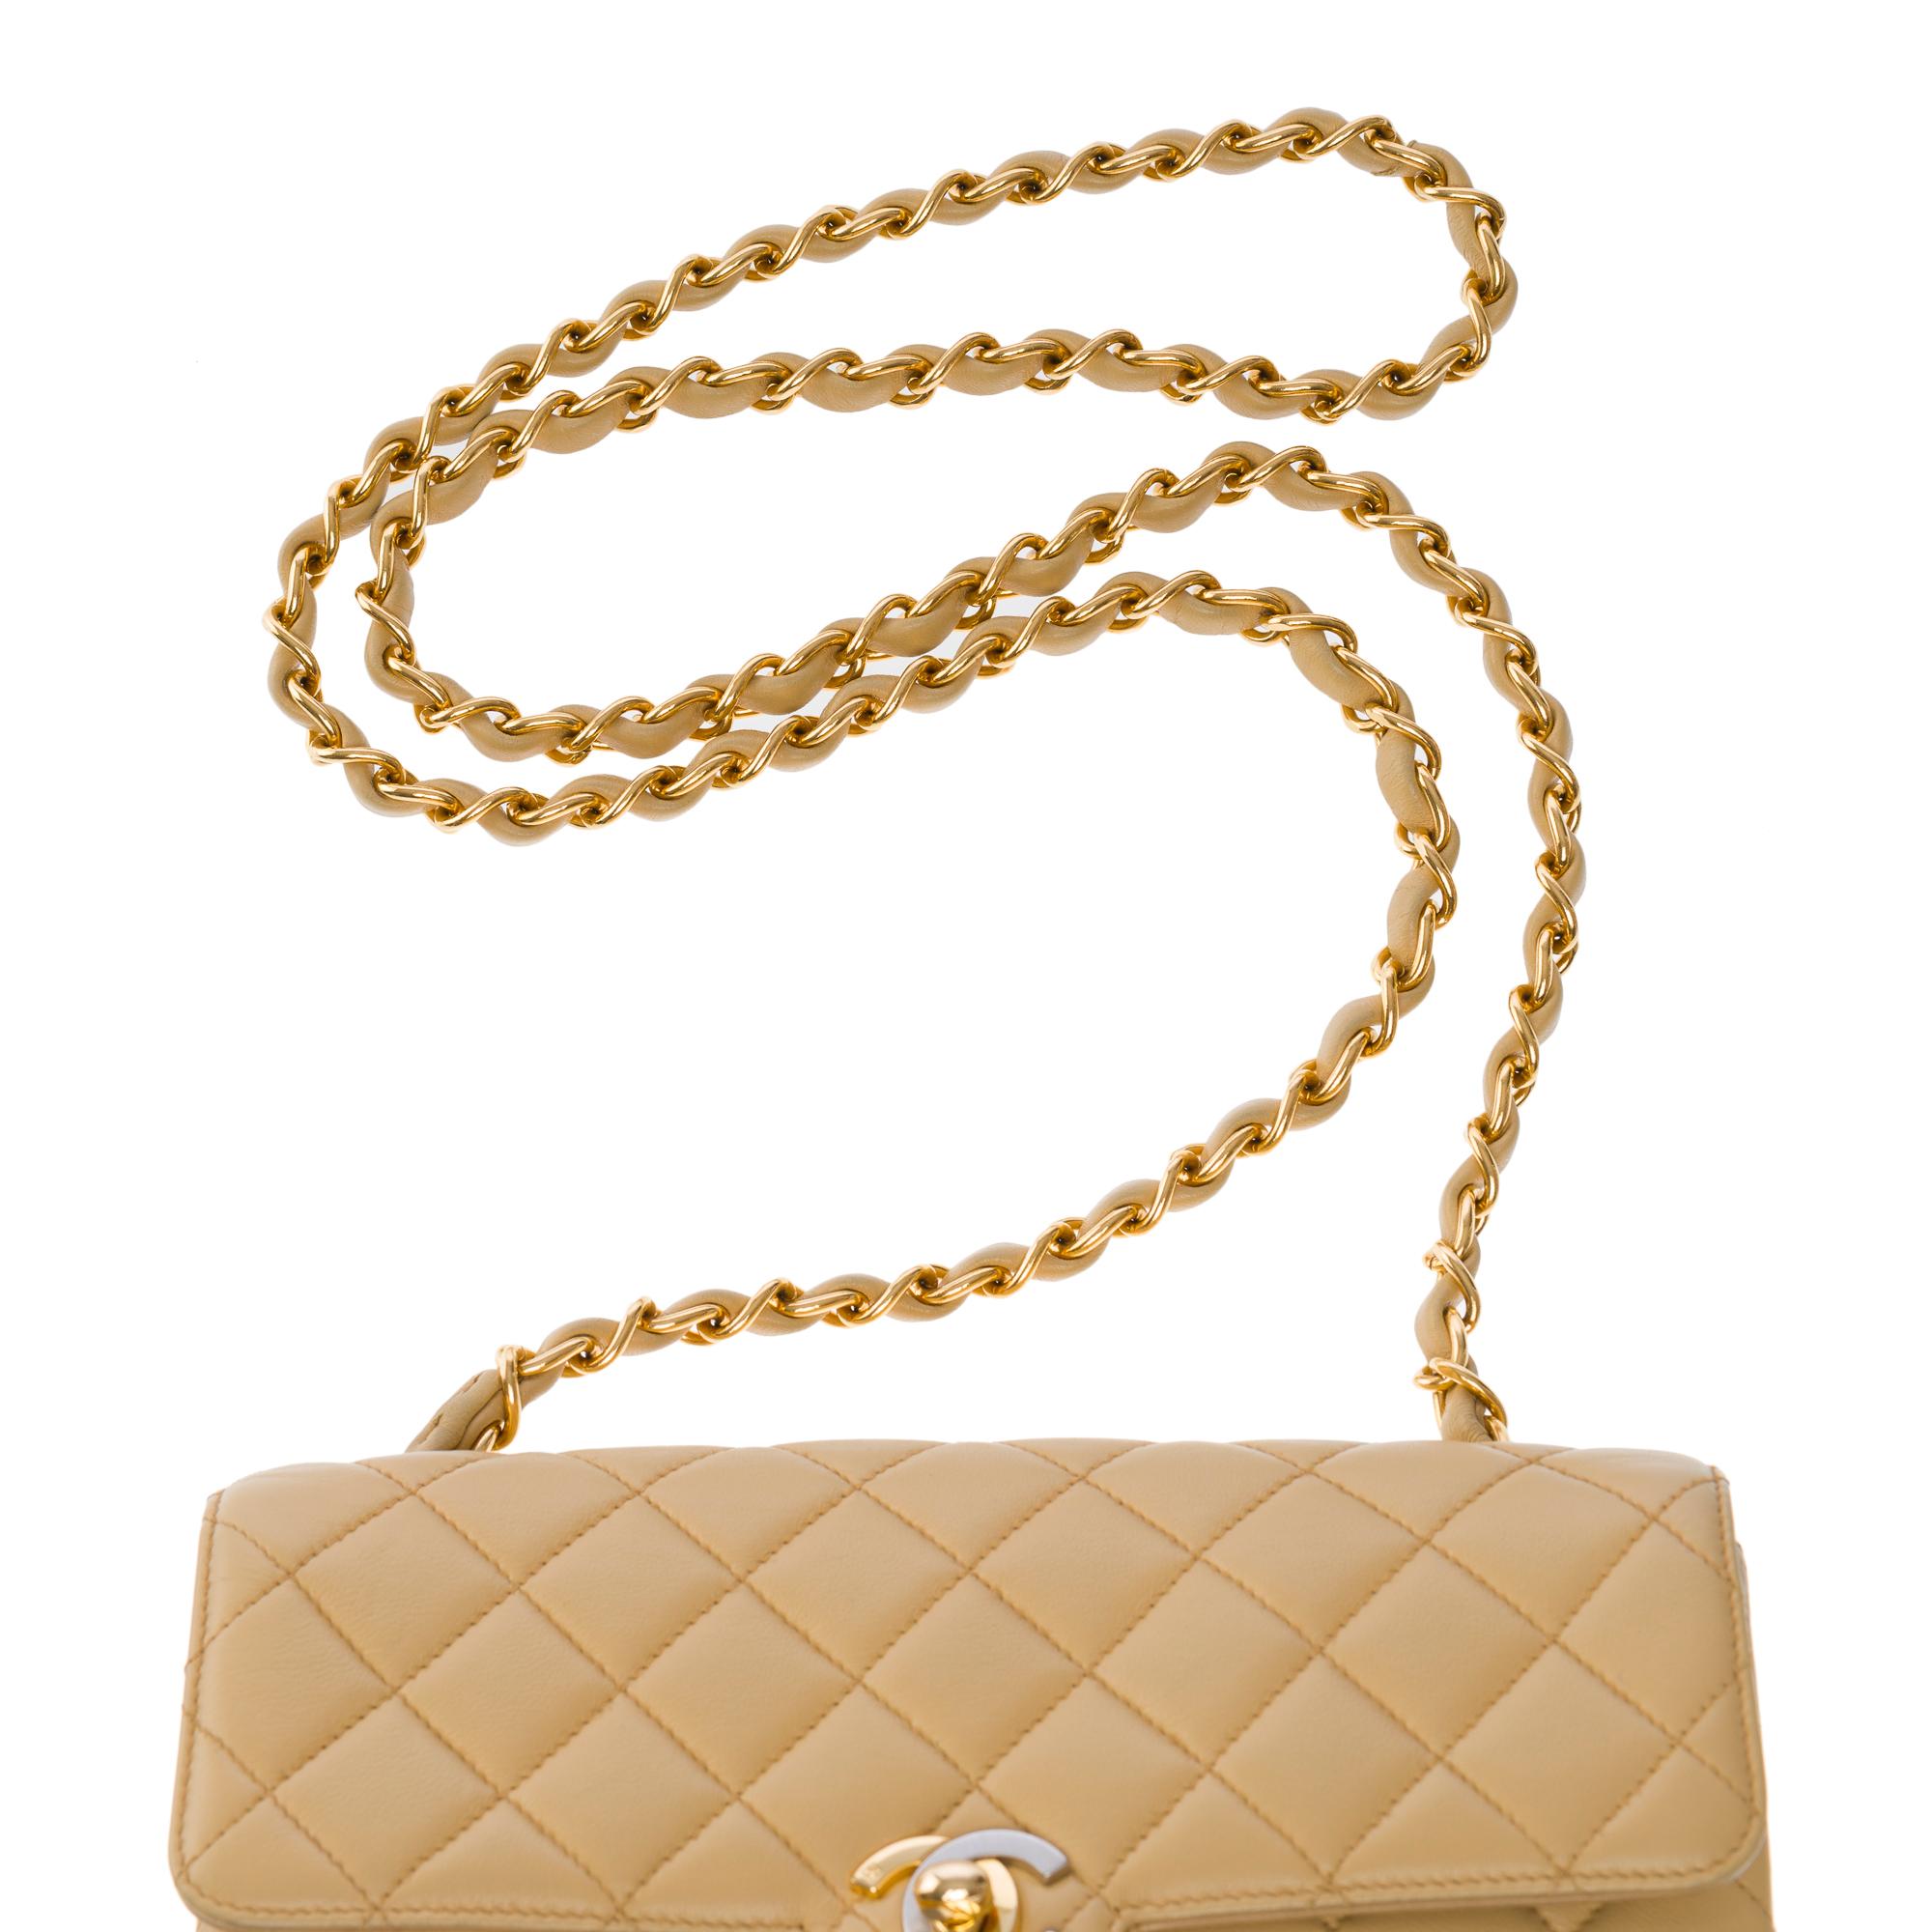 Beautiful Chanel Timeless Mini shoulder Flap bag in beige quilted lambskin, GHW For Sale 5